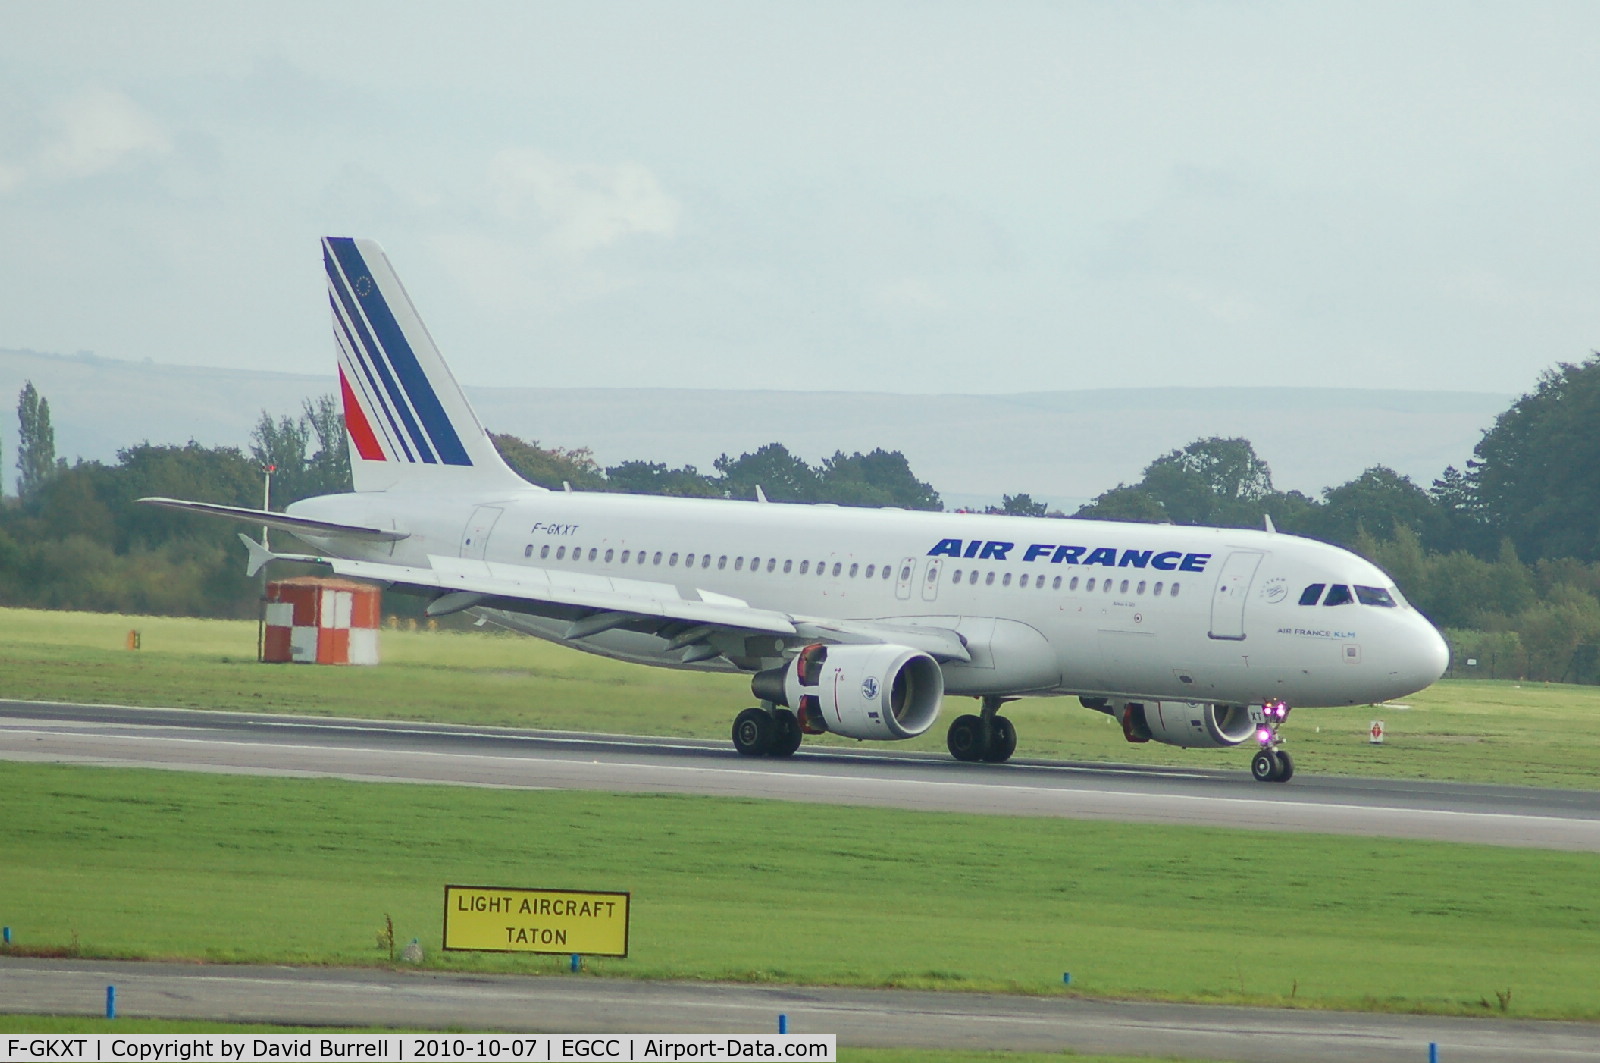 F-GKXT, 2009 Airbus A320-214 C/N 3859, Air France Airbus A320-214 Lands at Manchester Airport